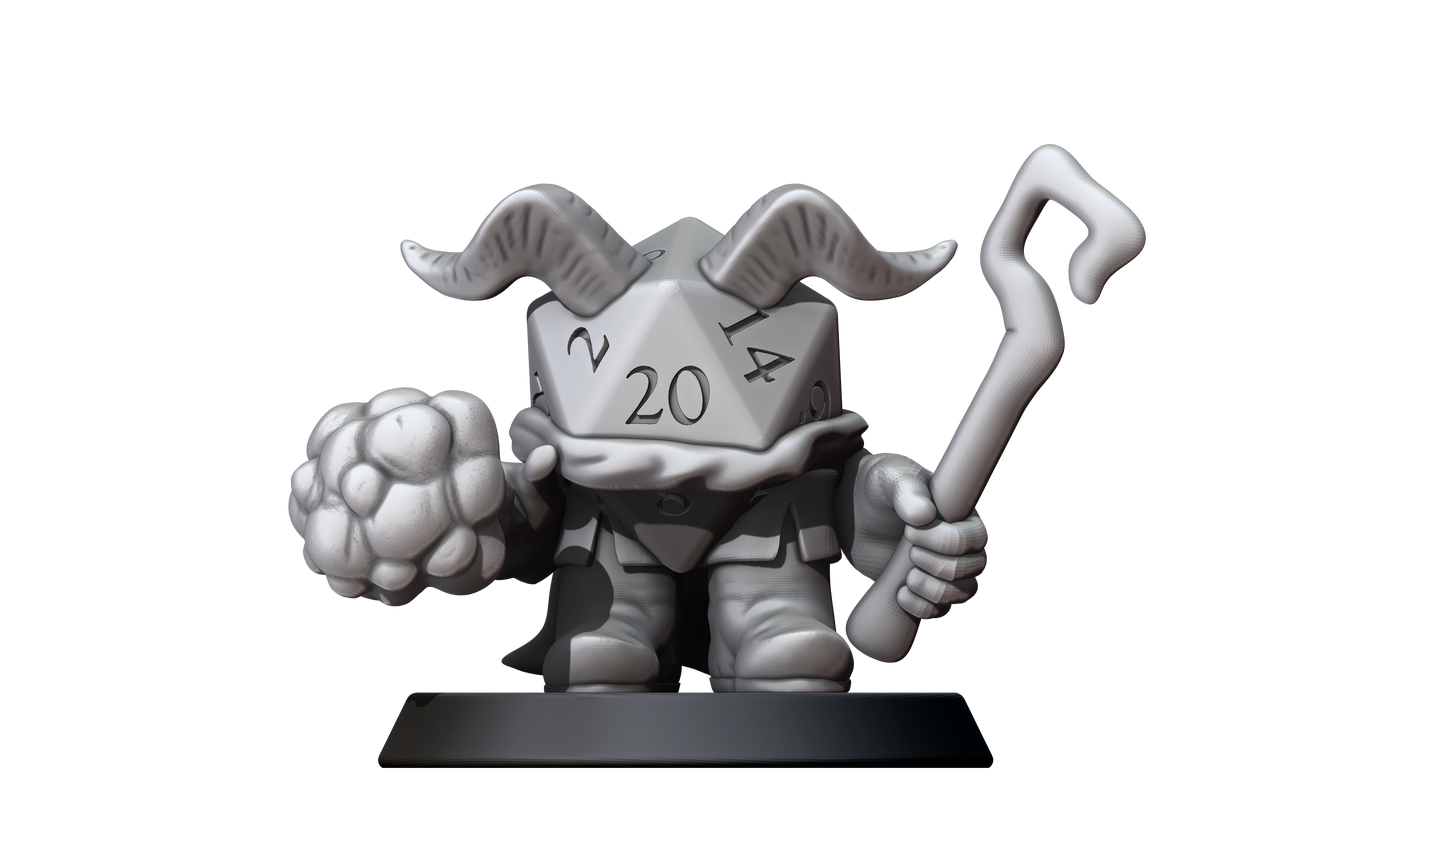 D20 Warlock Construct Hero (Small) by Minitaurus for Tabletop Games, Dioramas and Statues, Available in 15mm, 28mm, 32mm, 32mm heroic, 54mm and 75mm Statue Scale